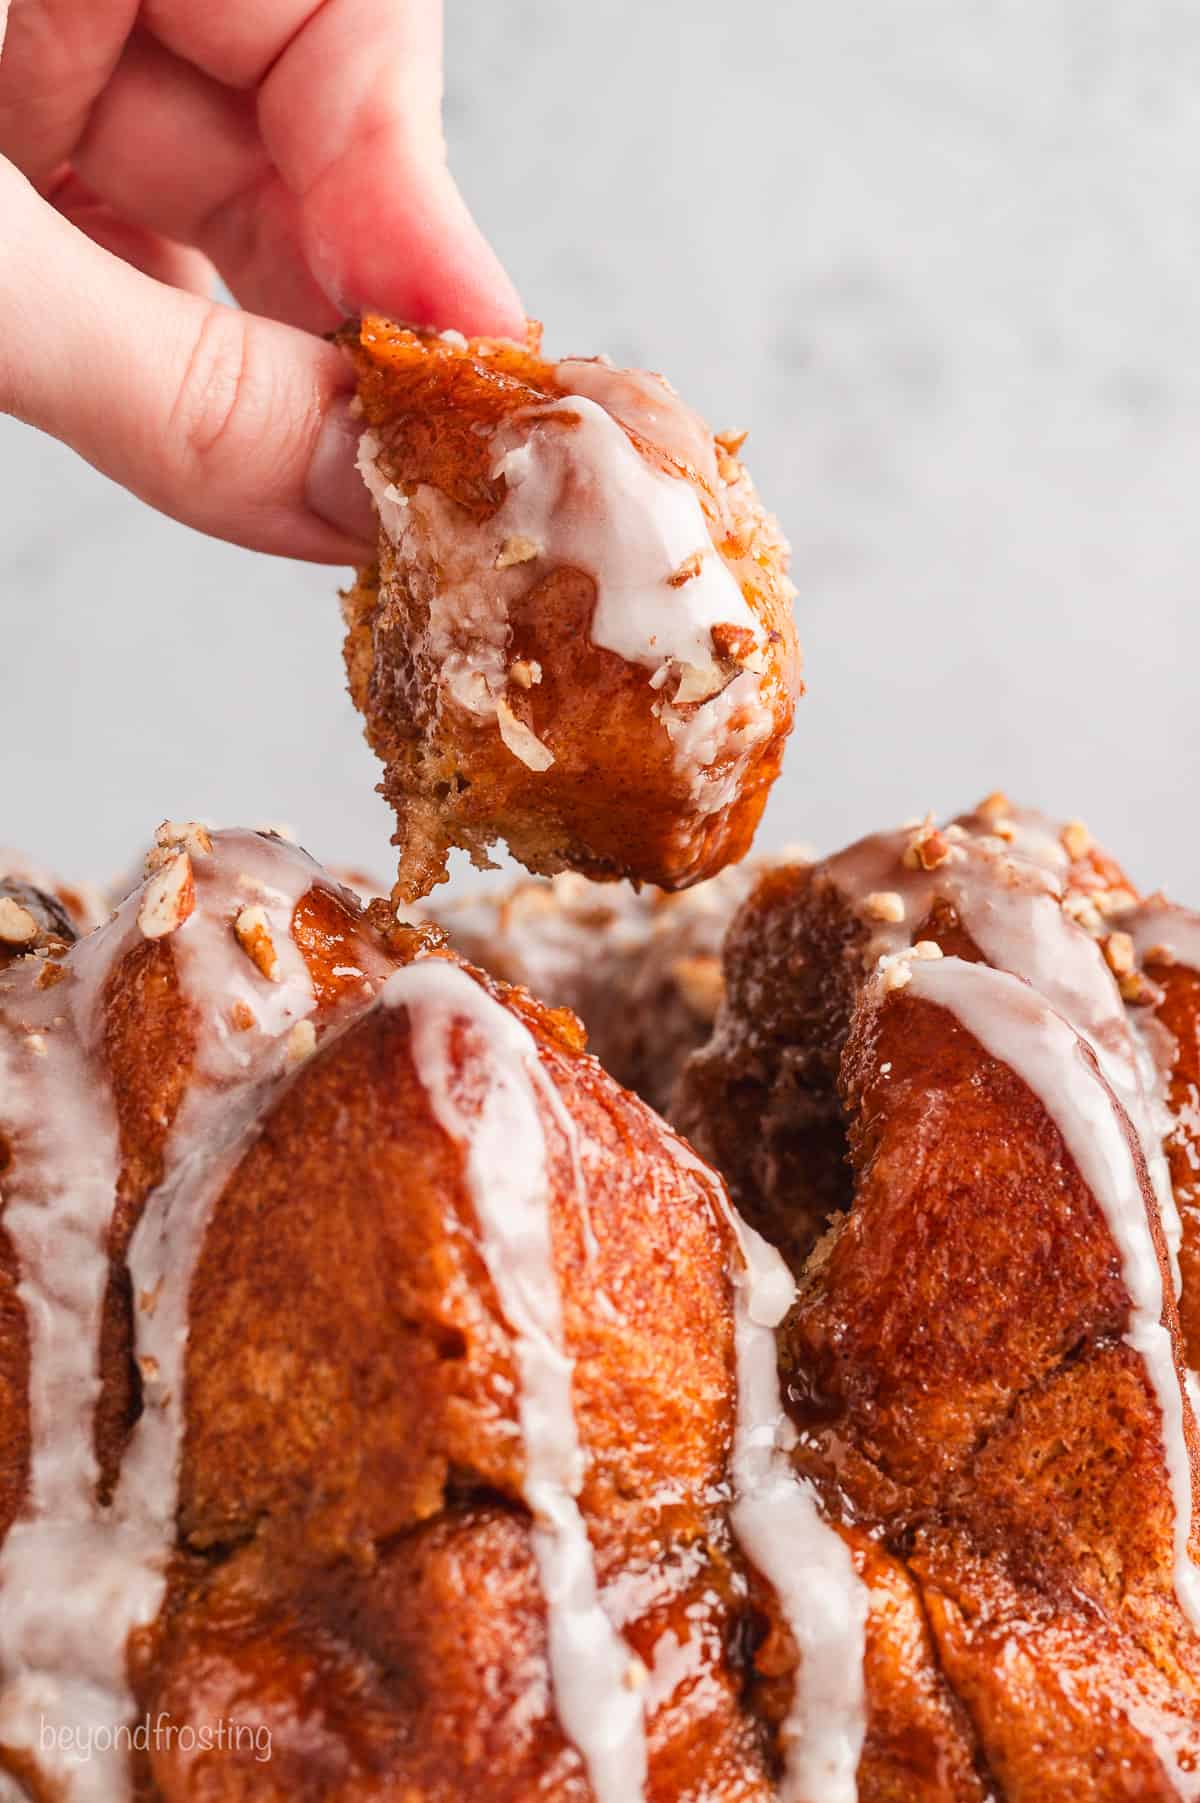 Close up of a hand pulling a piece of monkey bread free from the rest of the bread.